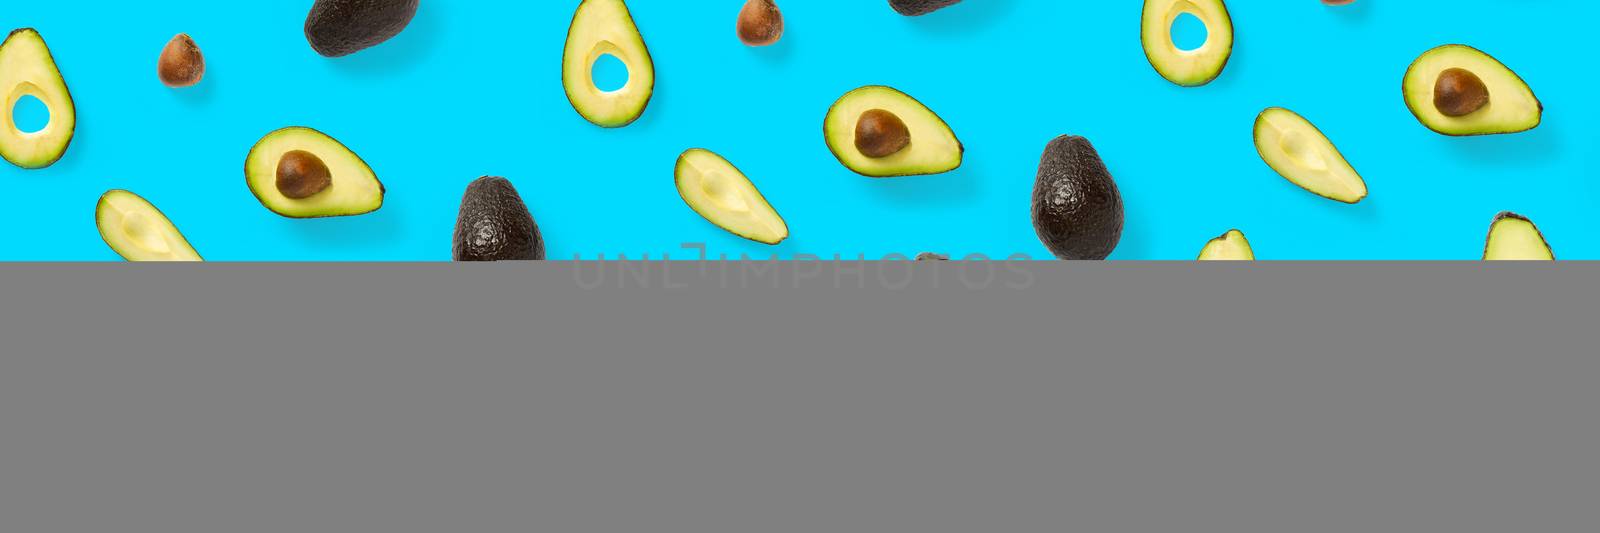 Avocado banner. Background made from isolated Avocado pieces on blue background. Flat lay of fresh ripe avocados and avacado pieces. by PhotoTime